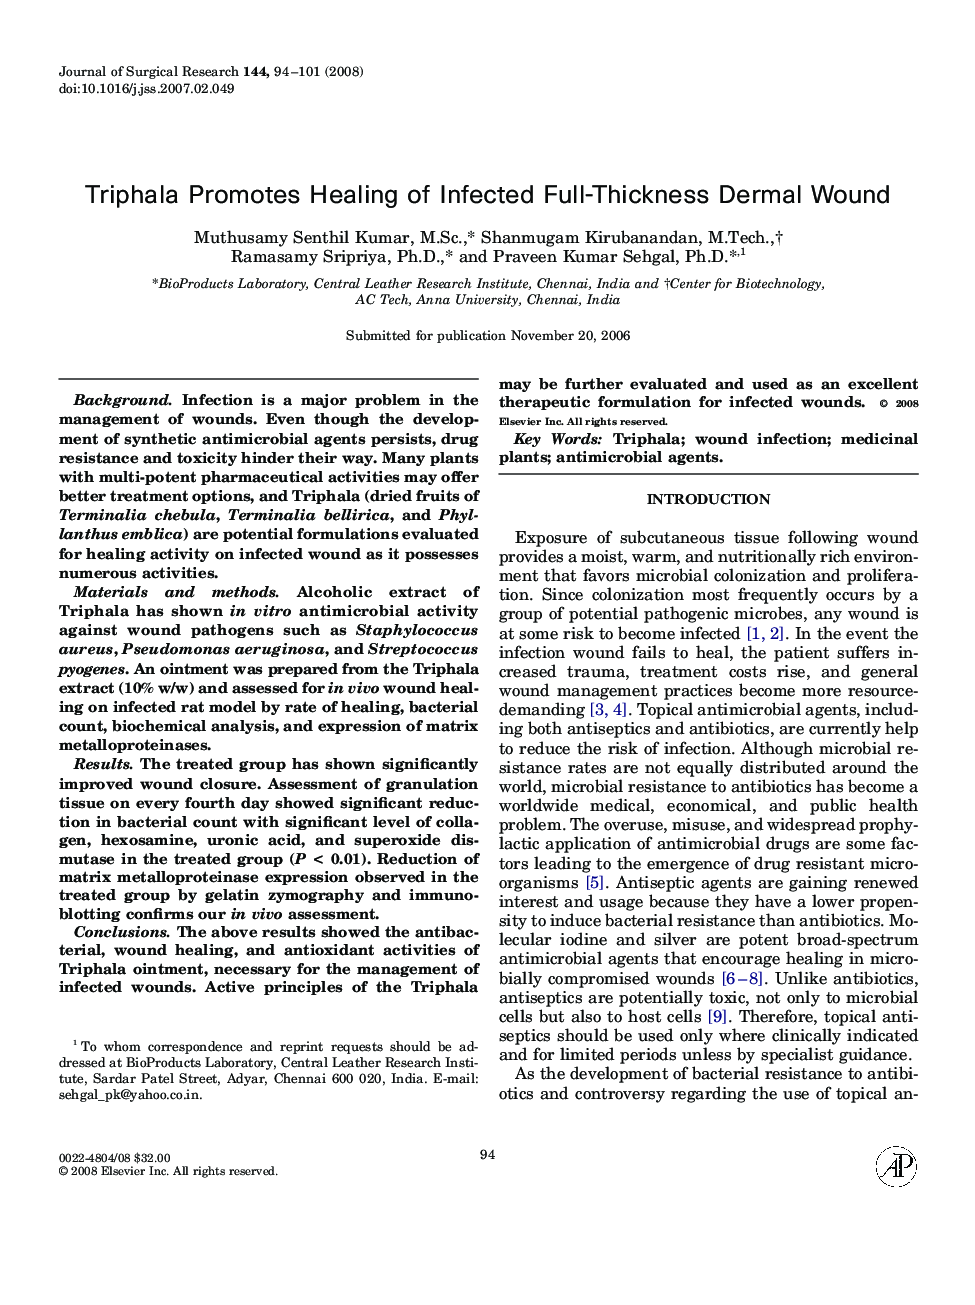 Triphala Promotes Healing of Infected Full-Thickness Dermal Wound